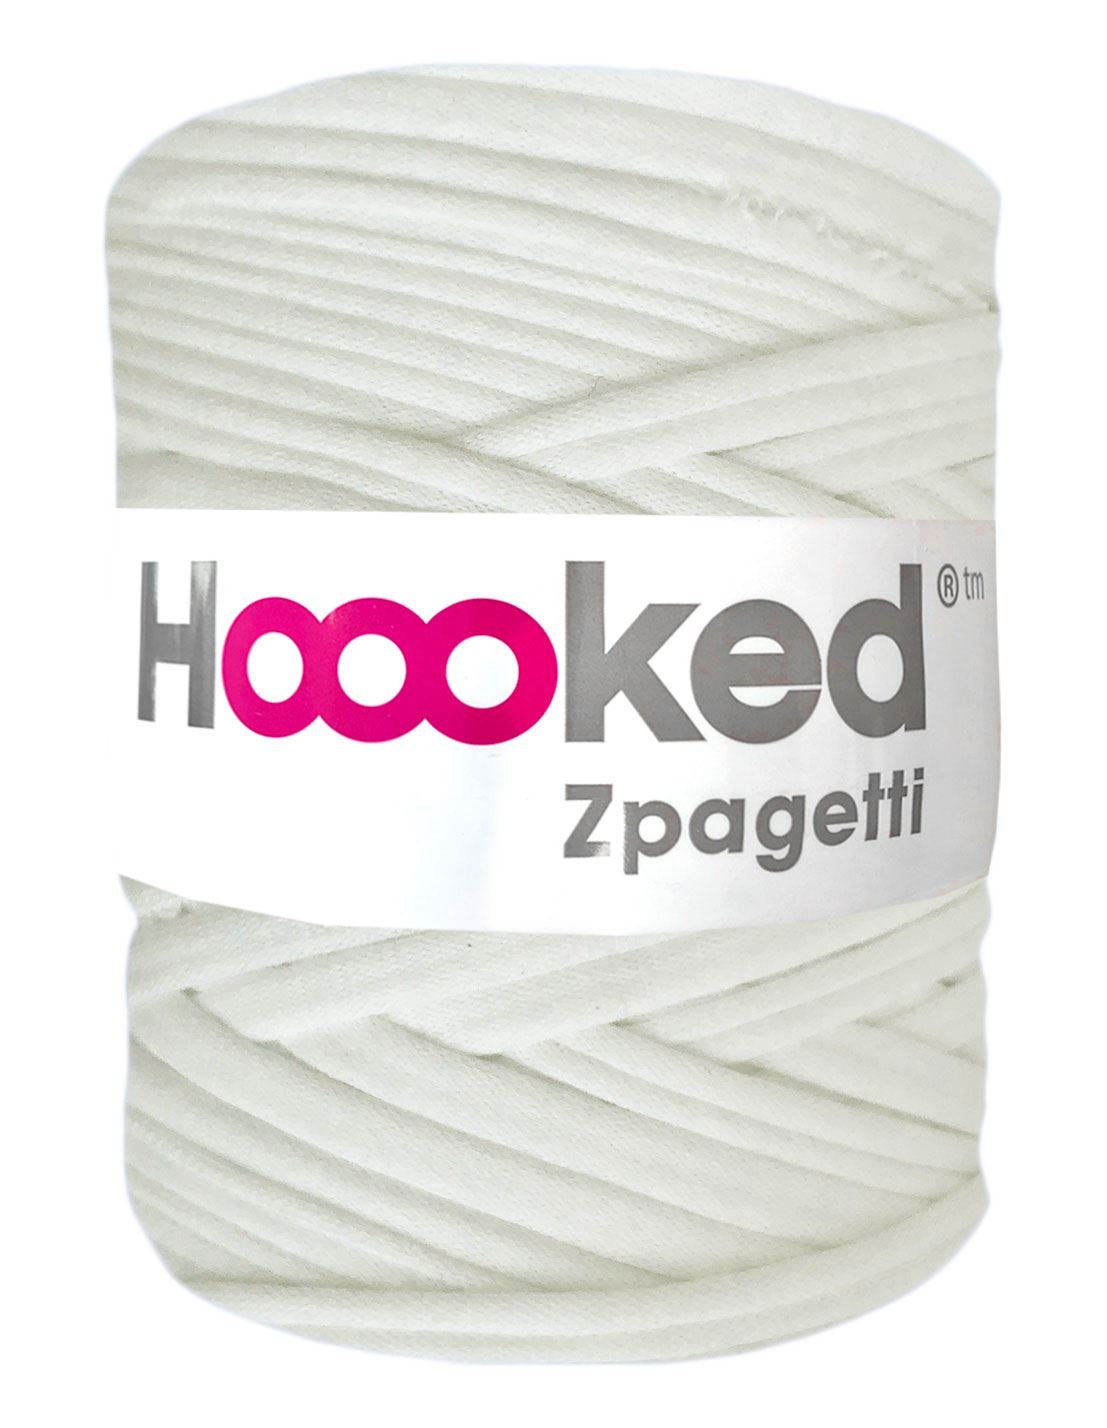 Off-white  t-shirt yarn by Hoooked Zpagetti (100-120m)